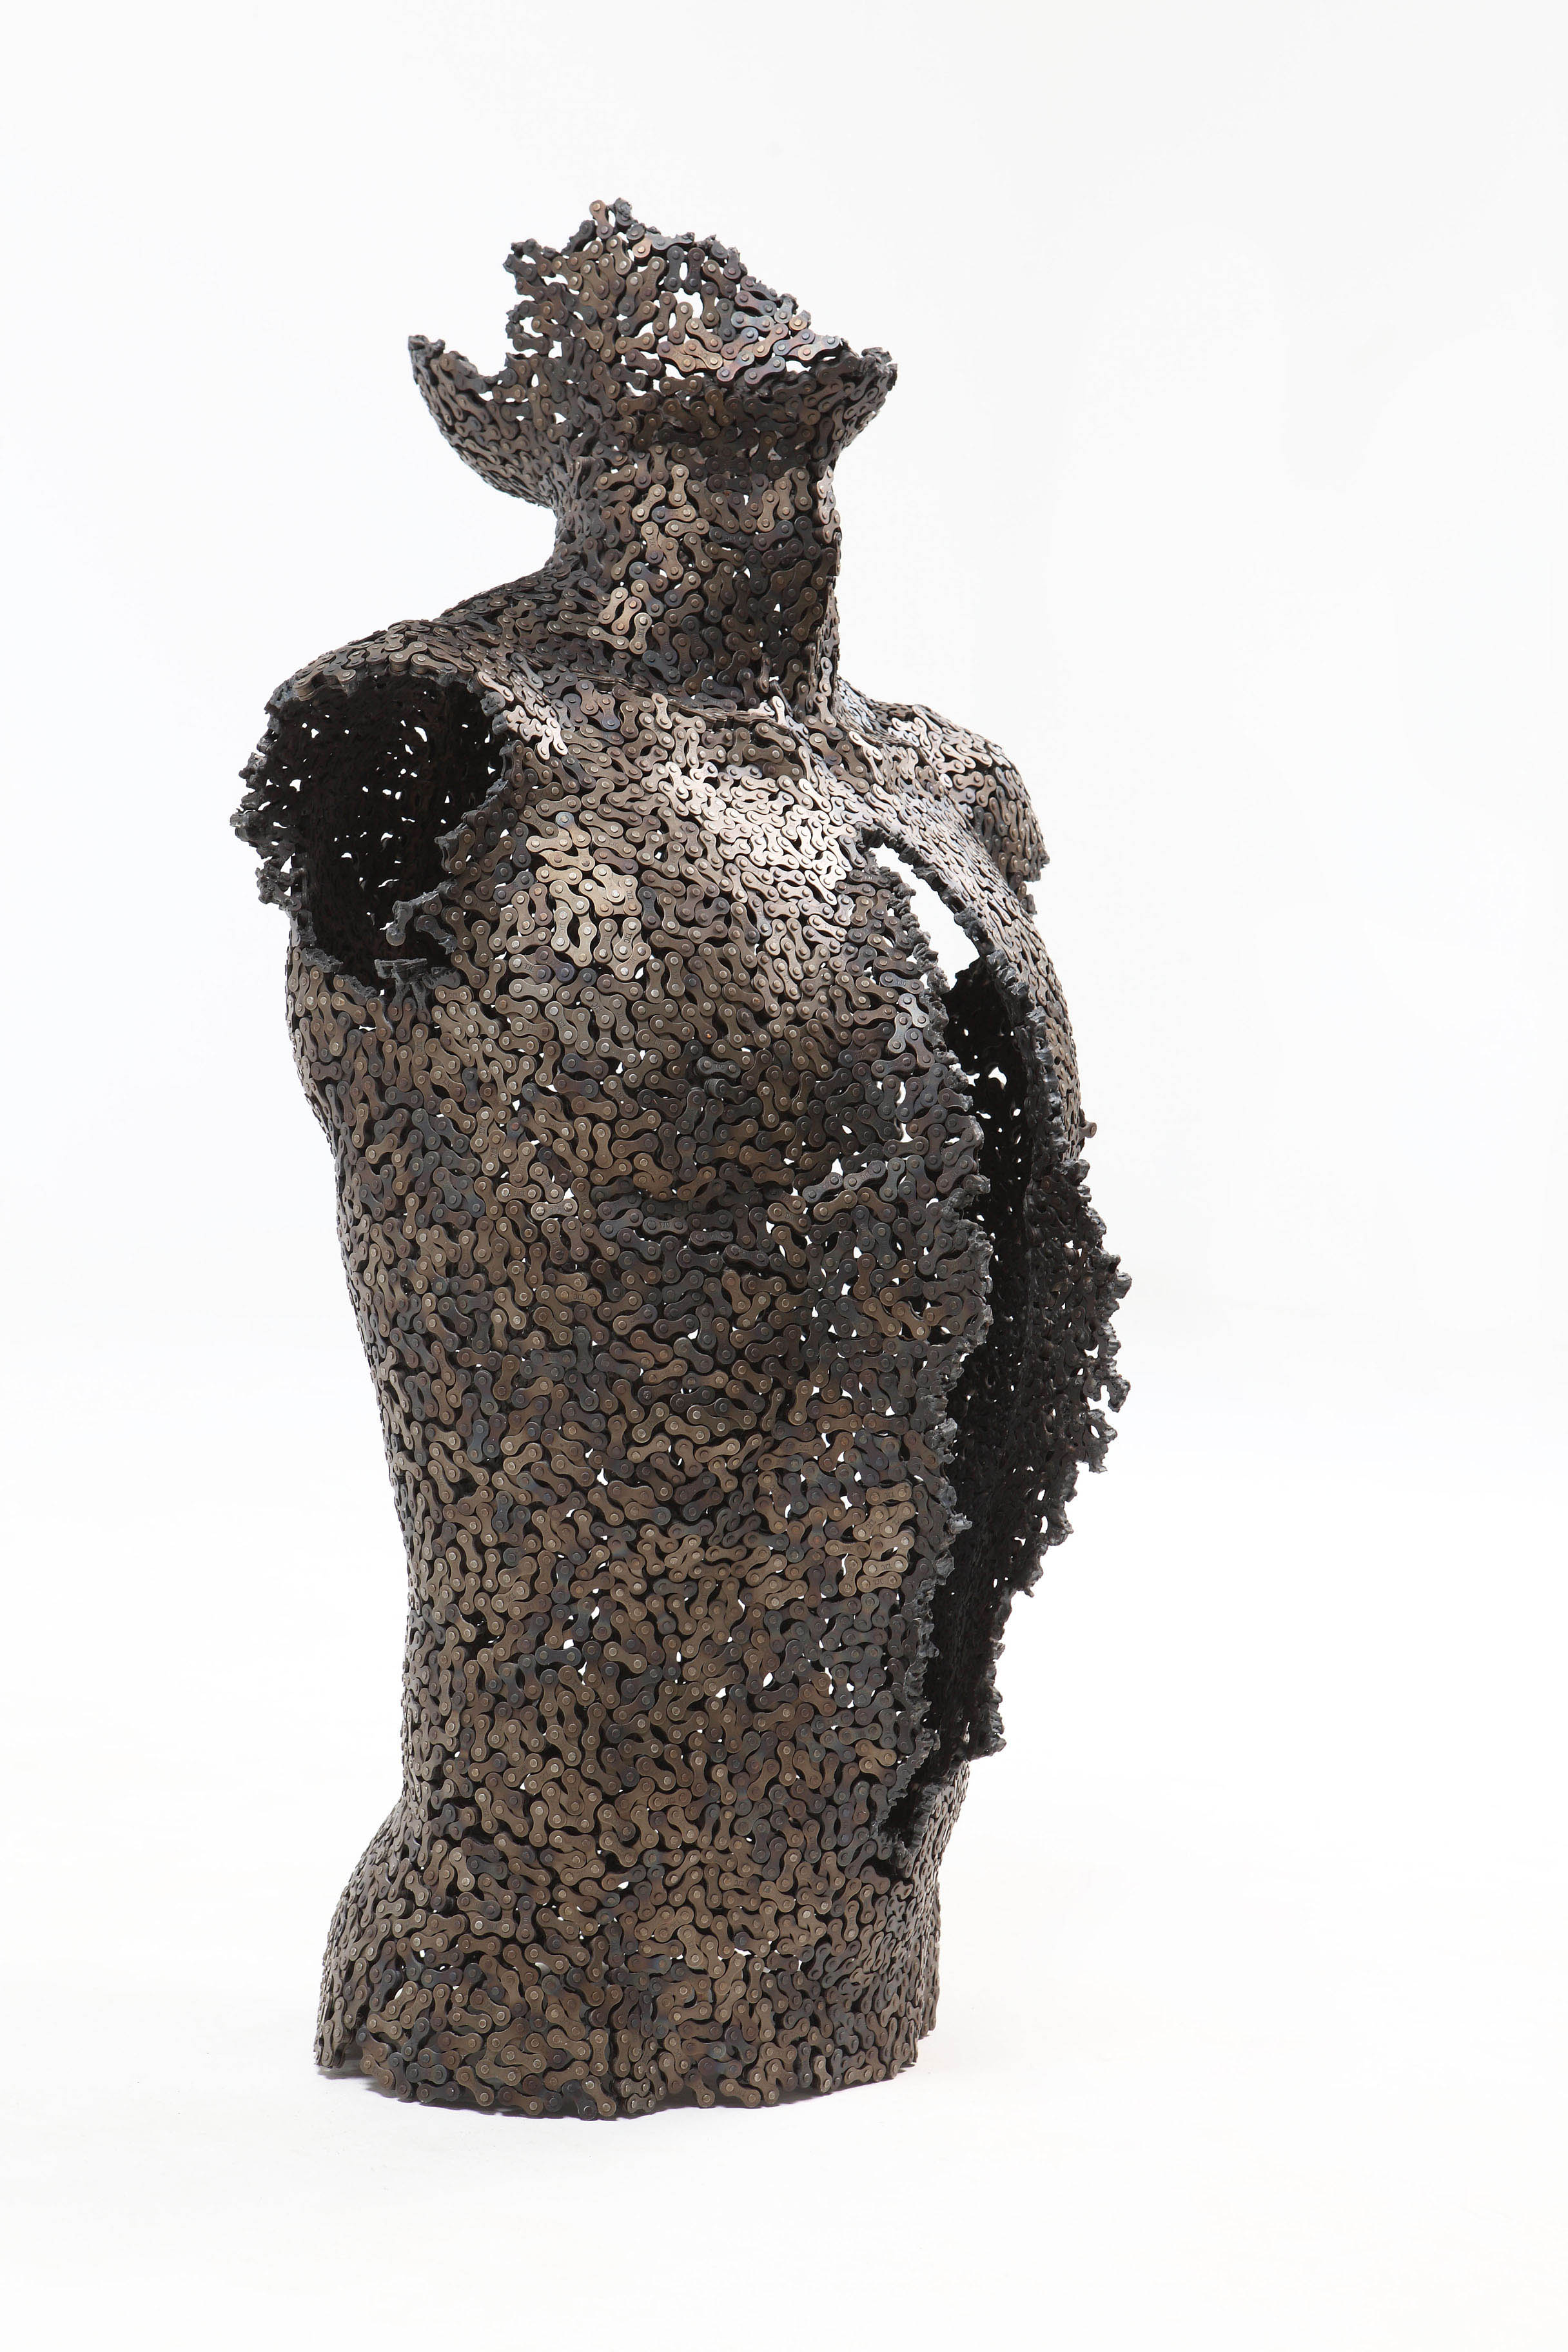 seo-young-deok-chain-sculptures-05